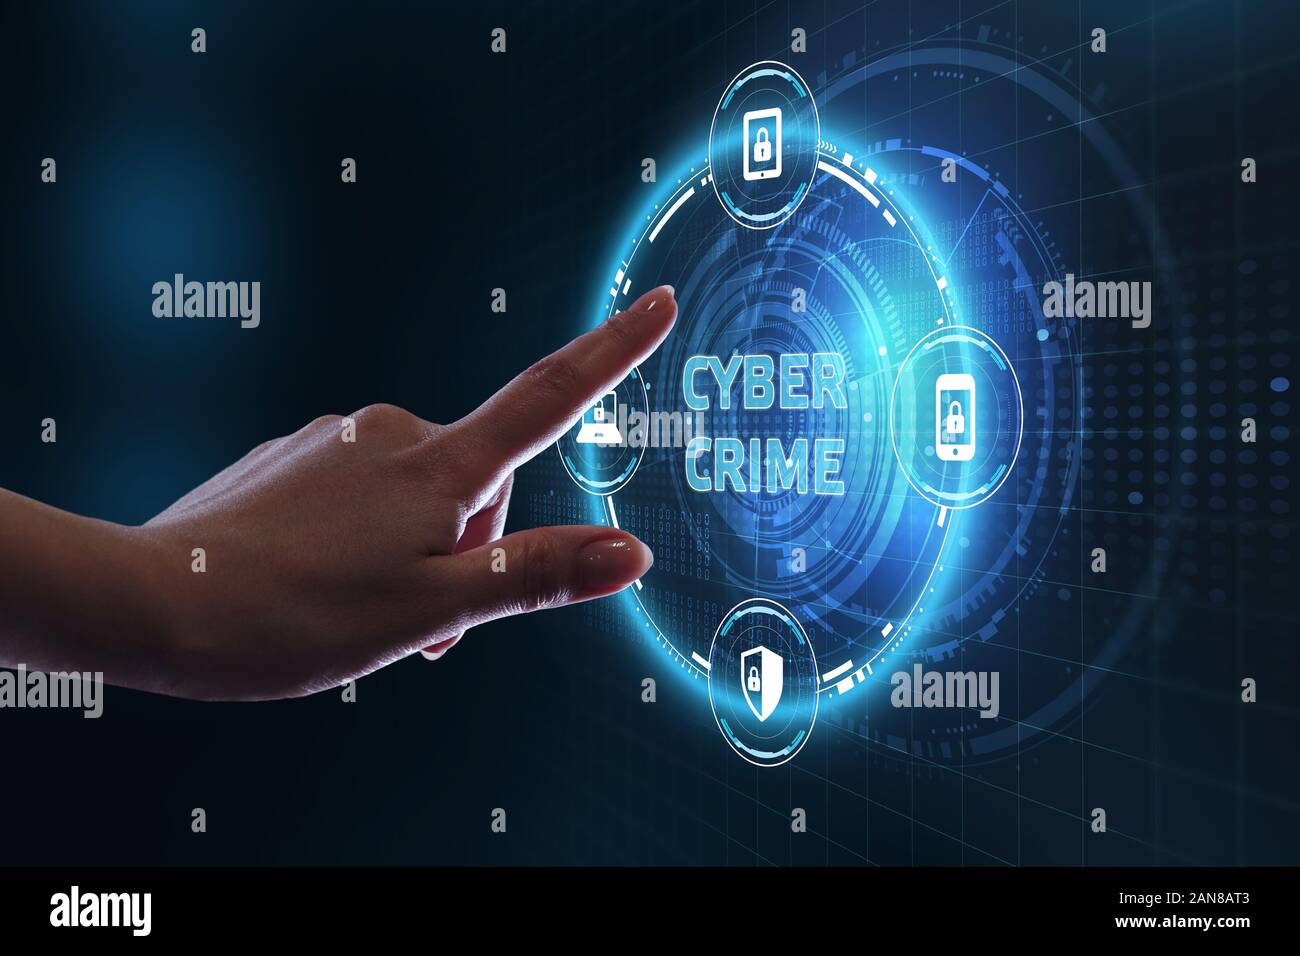 Business, technology, internet and networking concept. Young businessman select the icon Cyber crime on the virtual display. Stock Photo